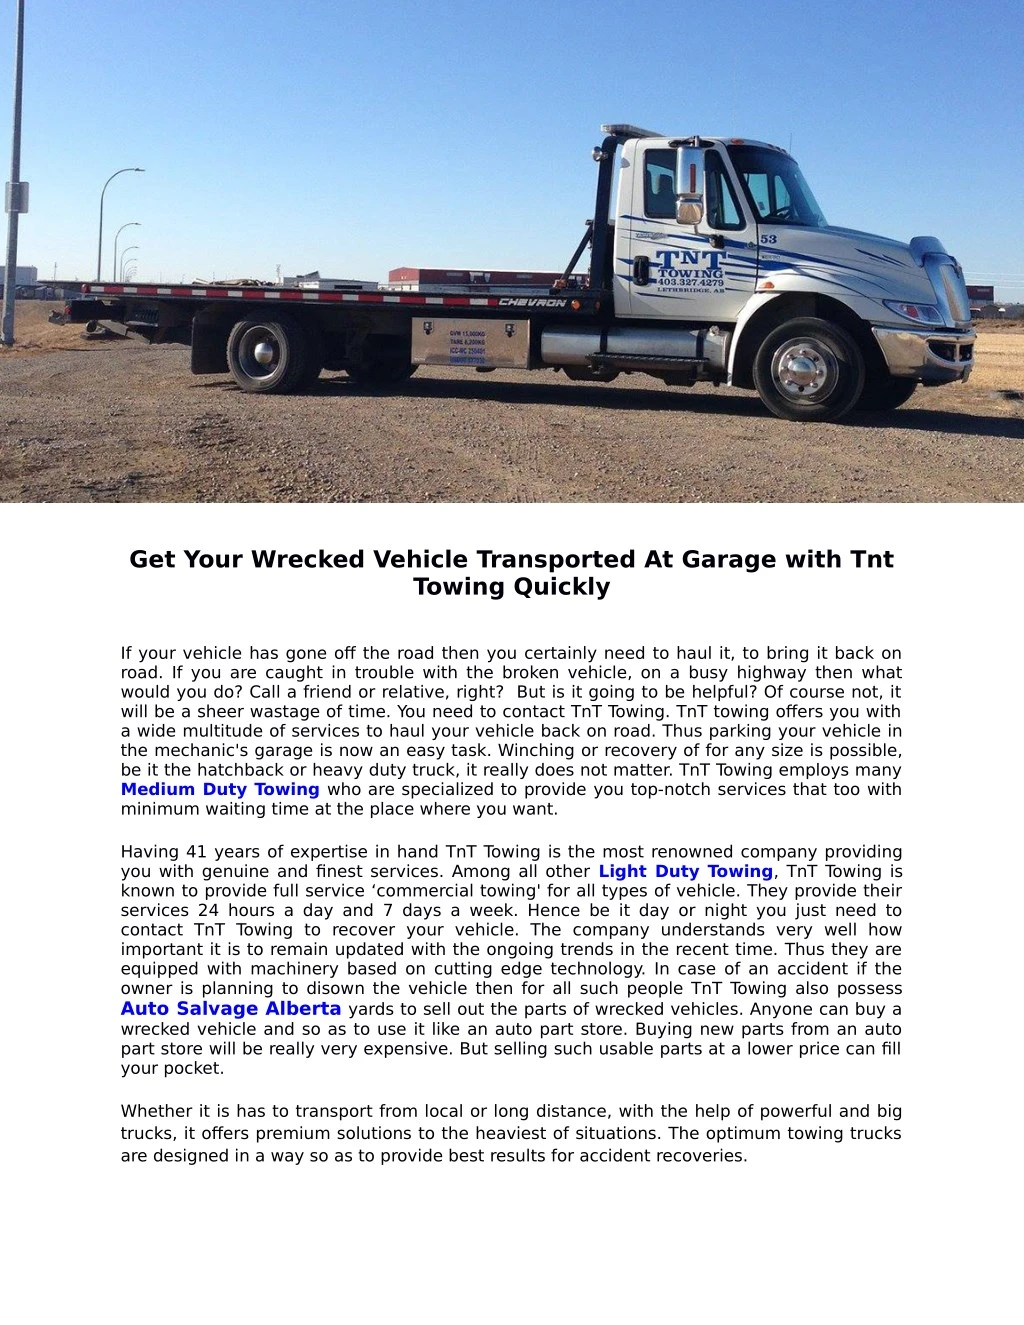 get your wrecked vehicle transported at garage